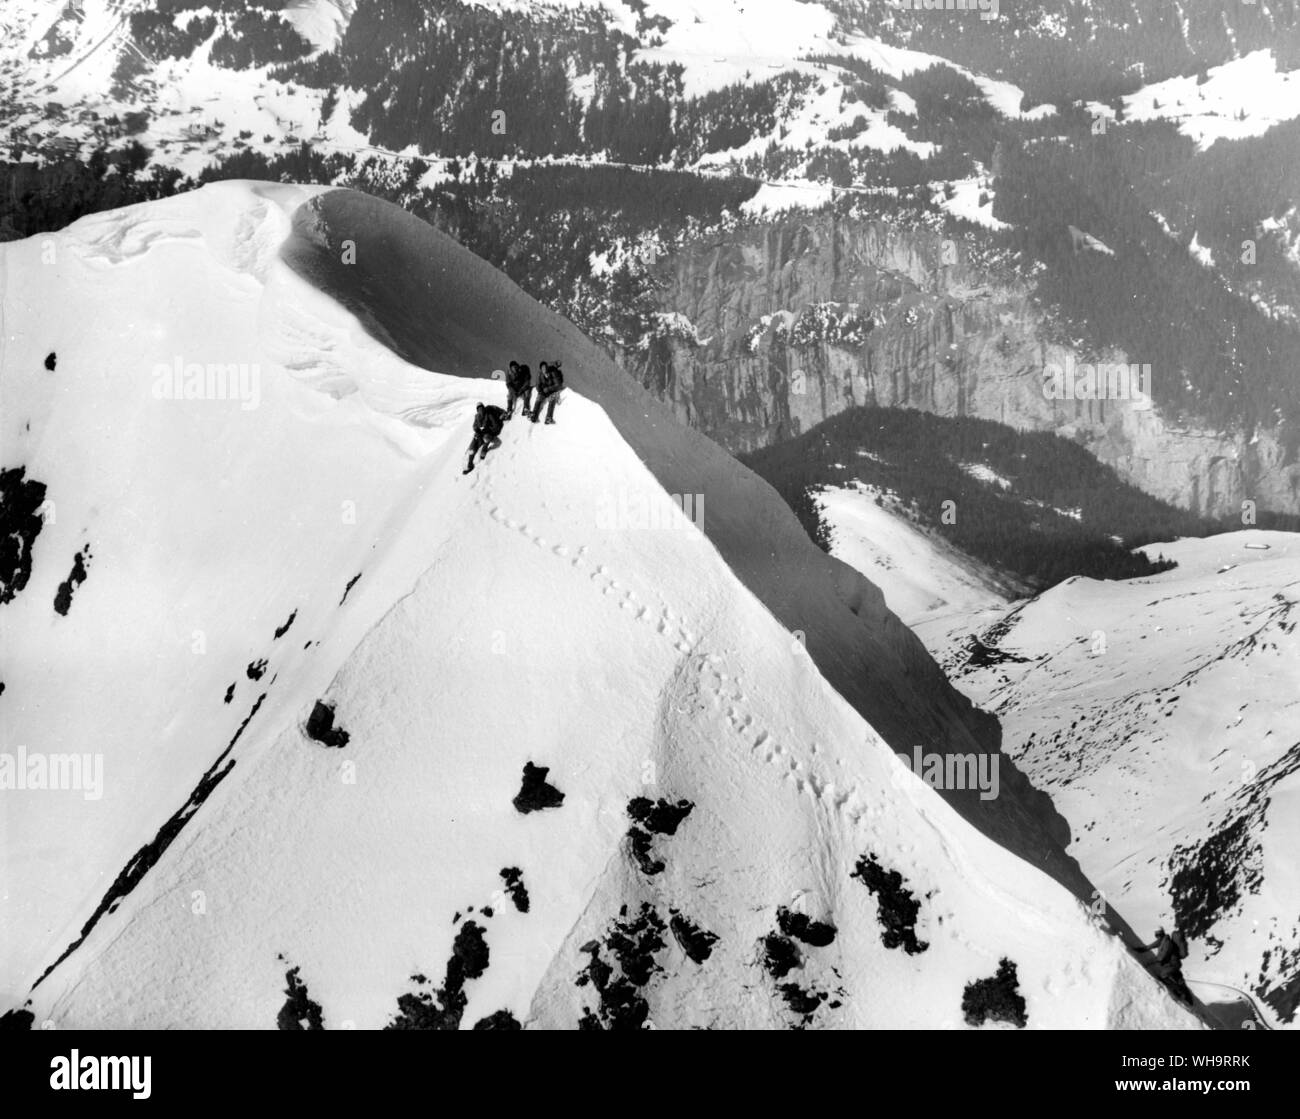 The end of the route for three of the climbers as they wait for their fellow mountaineer to finish the last few feet of the climb to the summit of the Eiger Mountain. 12th March 1961. Stock Photo